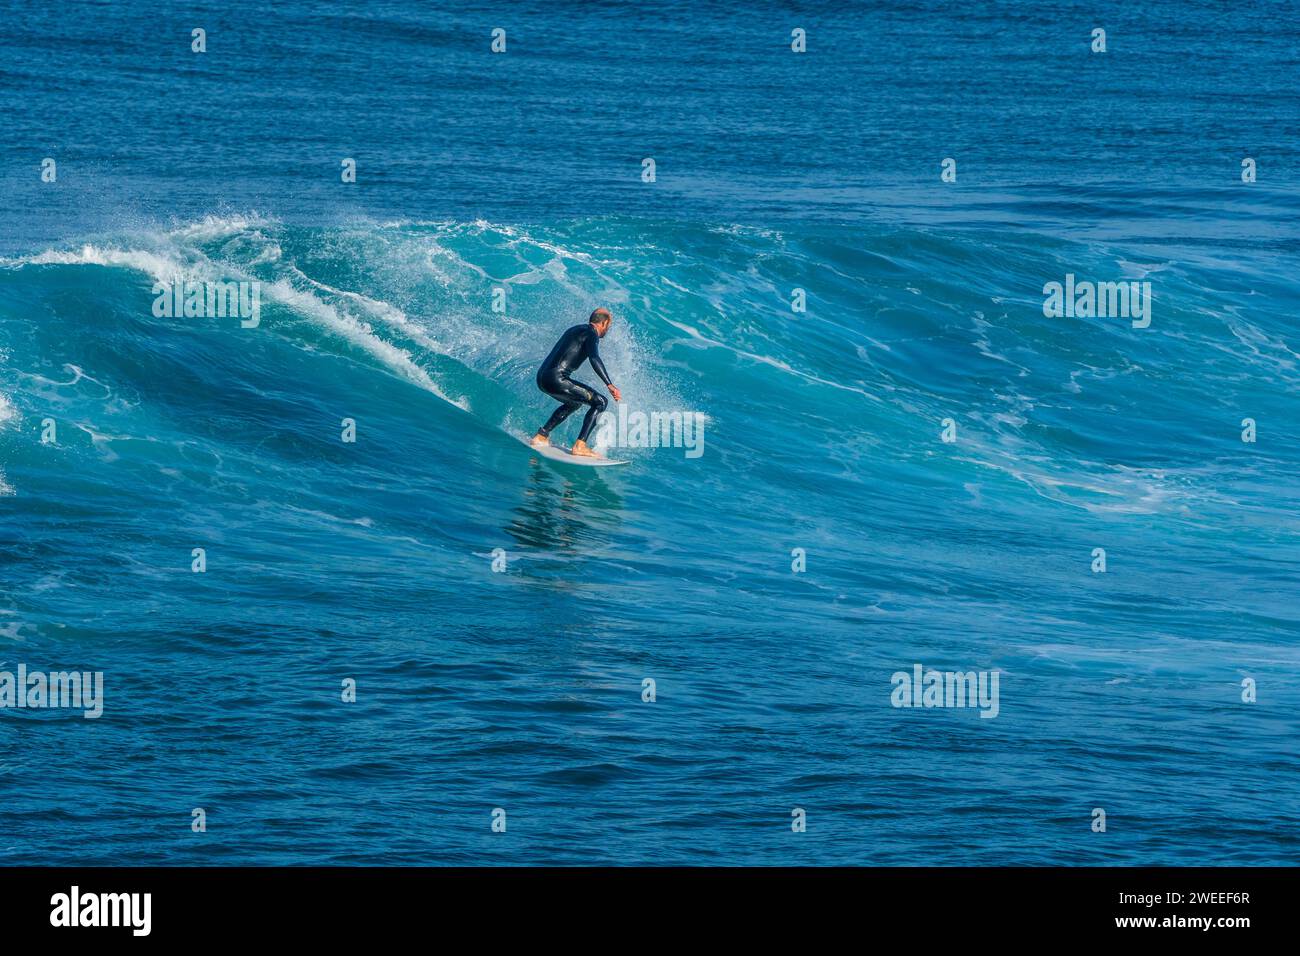 Surfing the wave in Carrapateira, Portugal Stock Photo